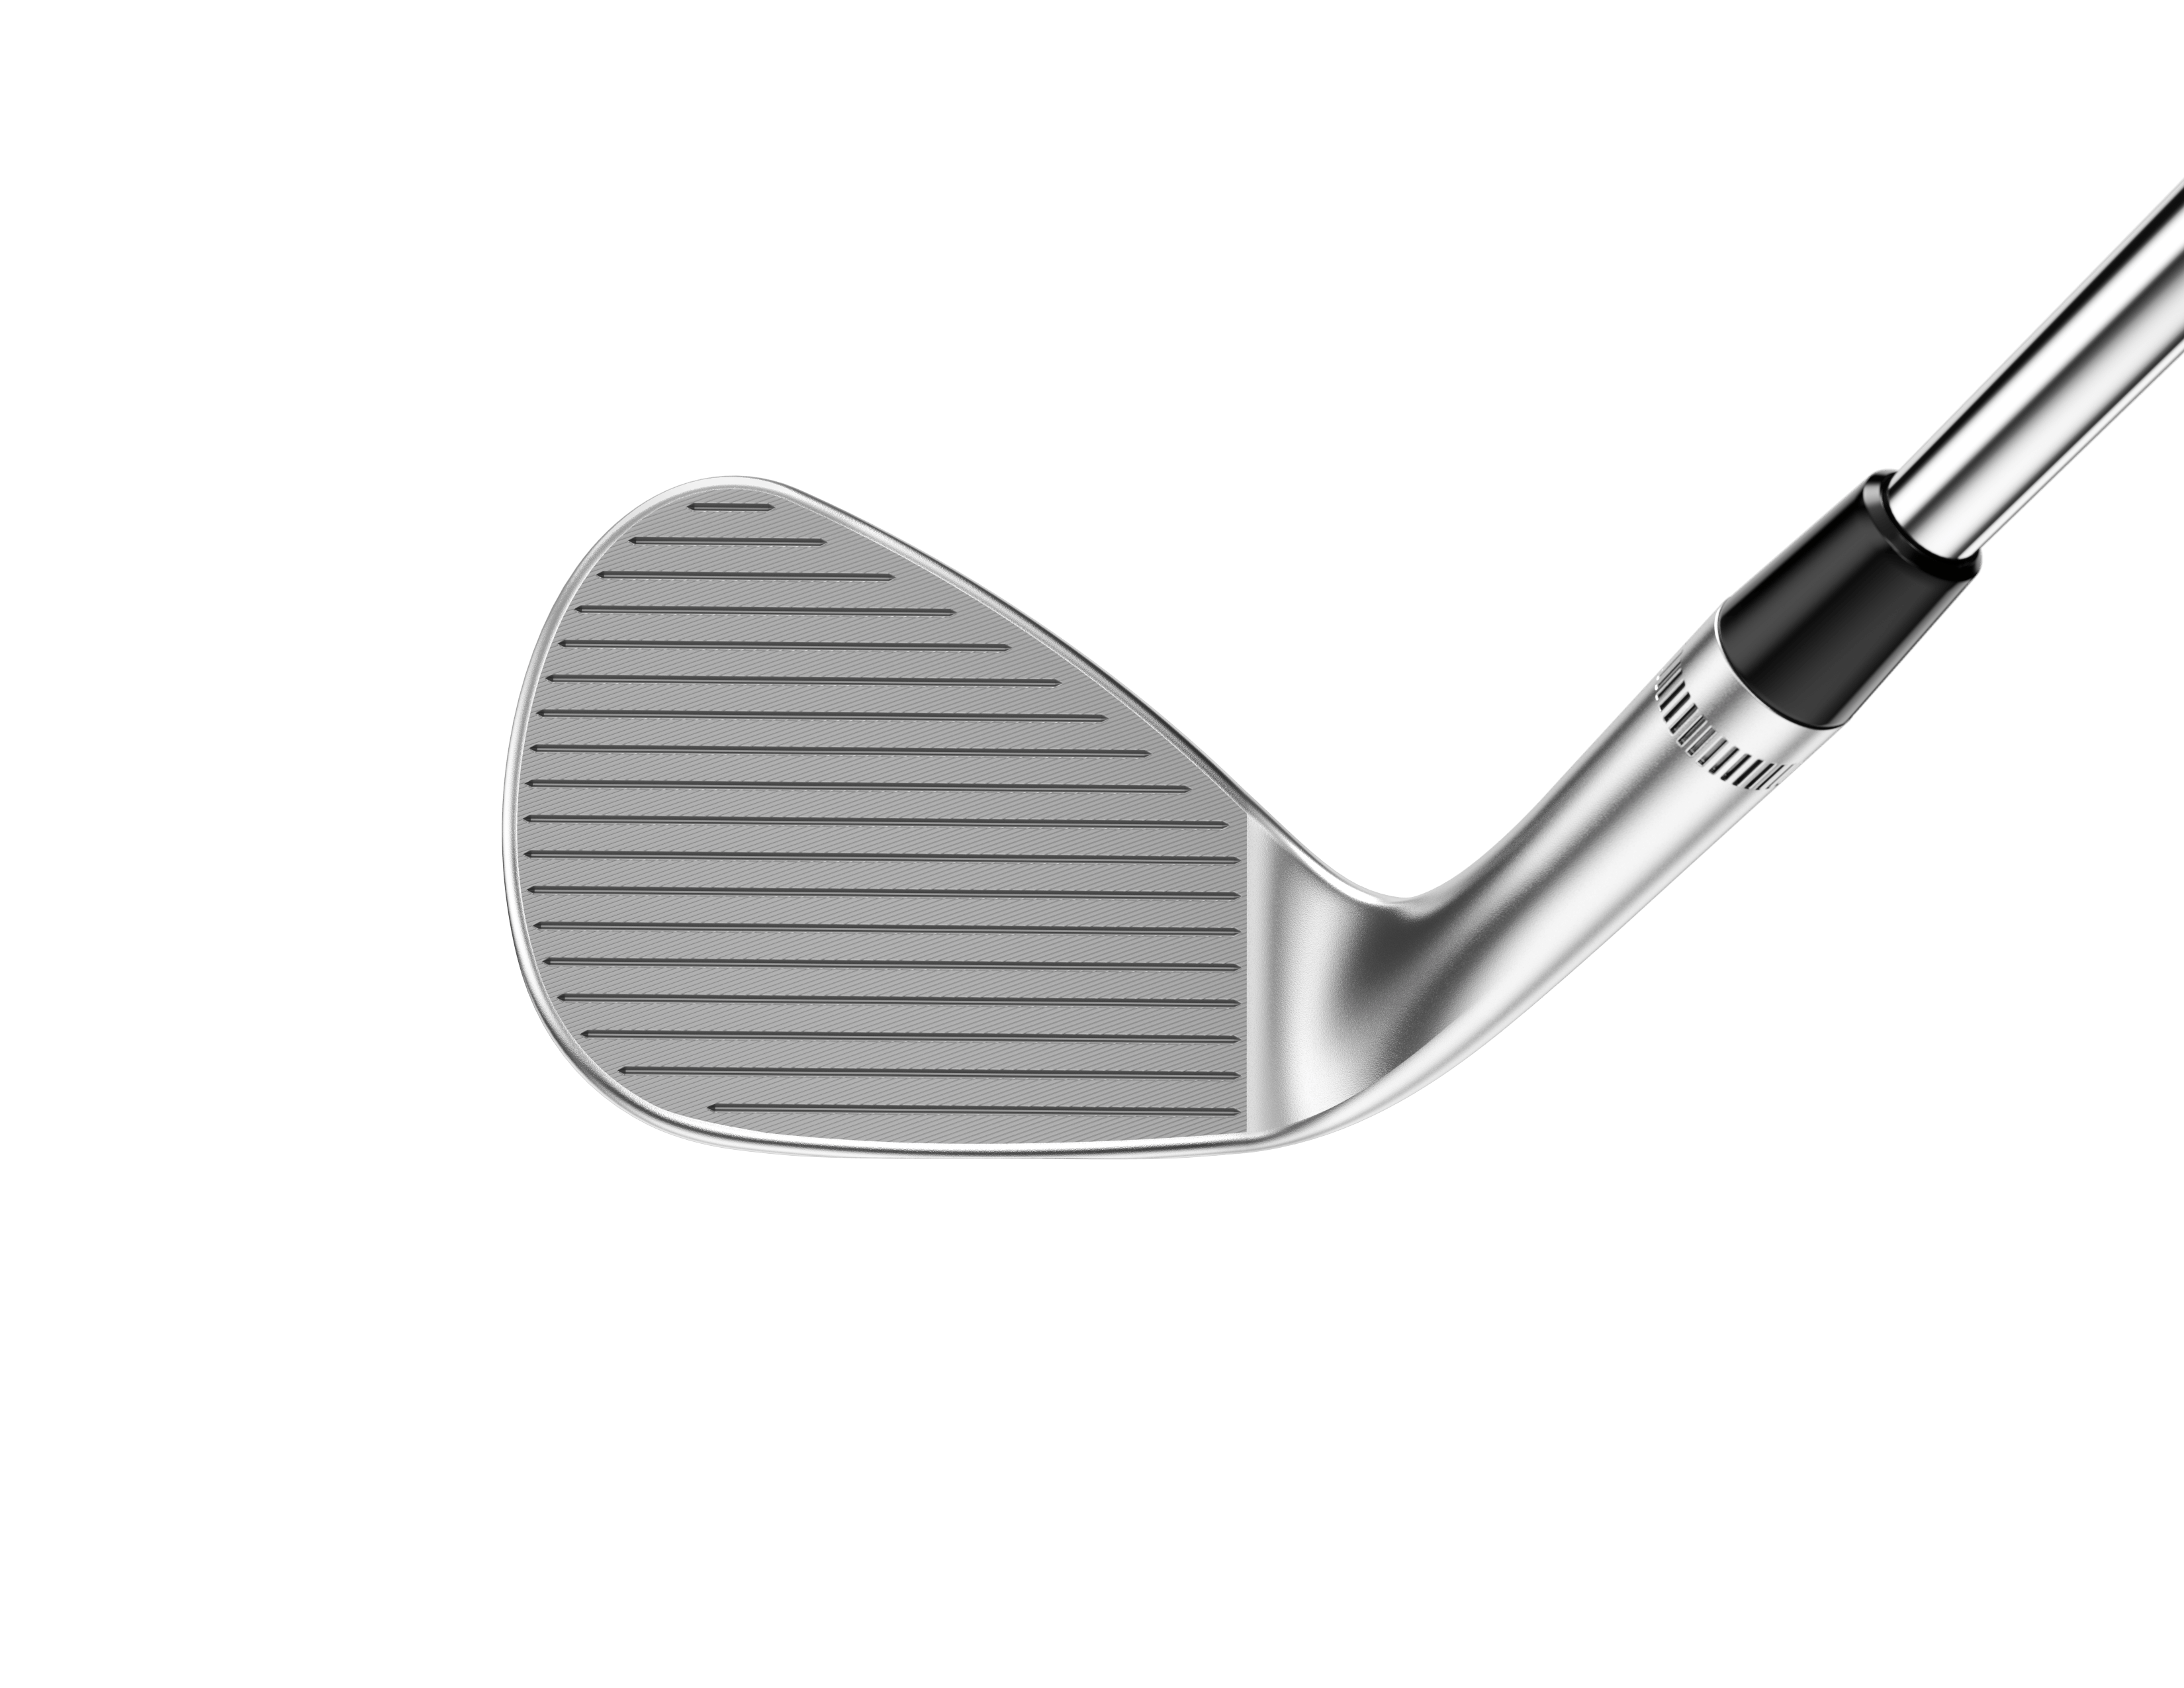 Callaway Jaws Raw Full Toe Wedge · Left Handed · Graphite · 54° · 10